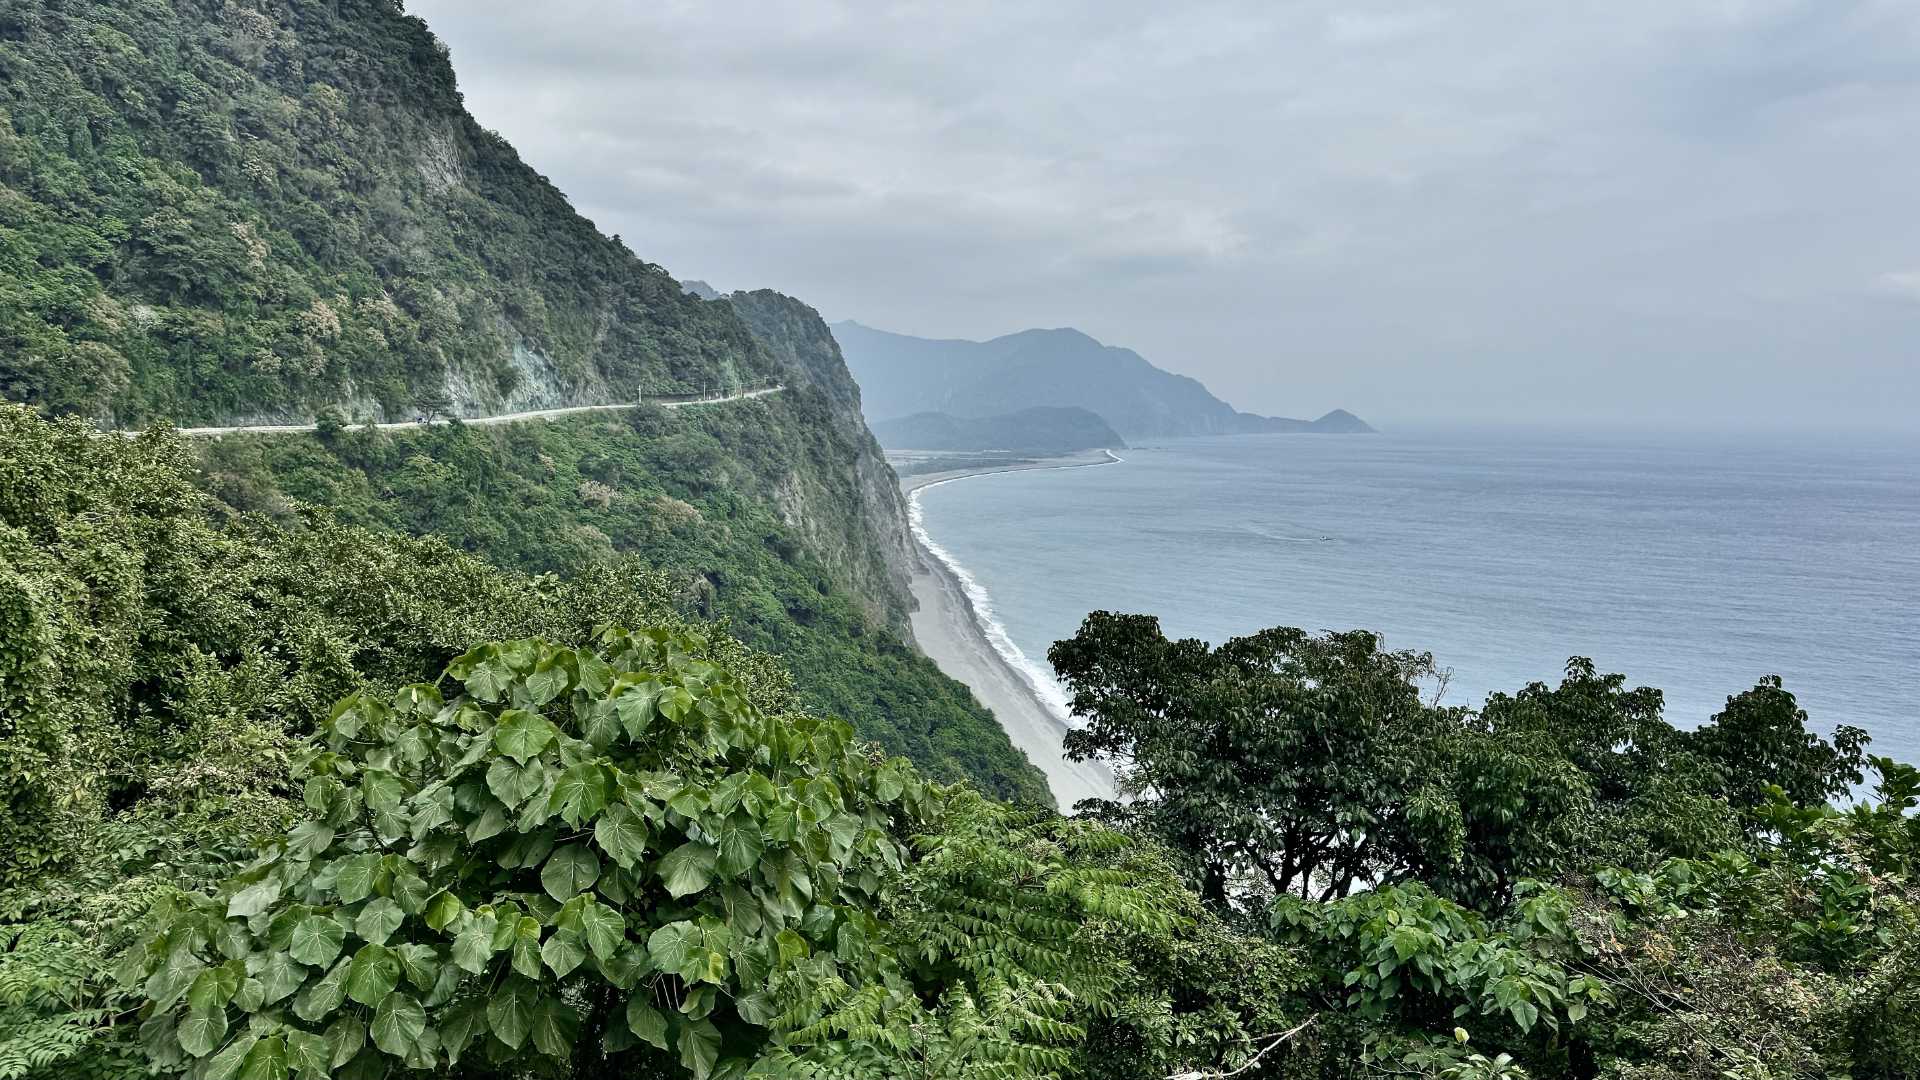 Photo of a road carved into a steep cliff-face, above the sea, on Taiwan’s east coast.